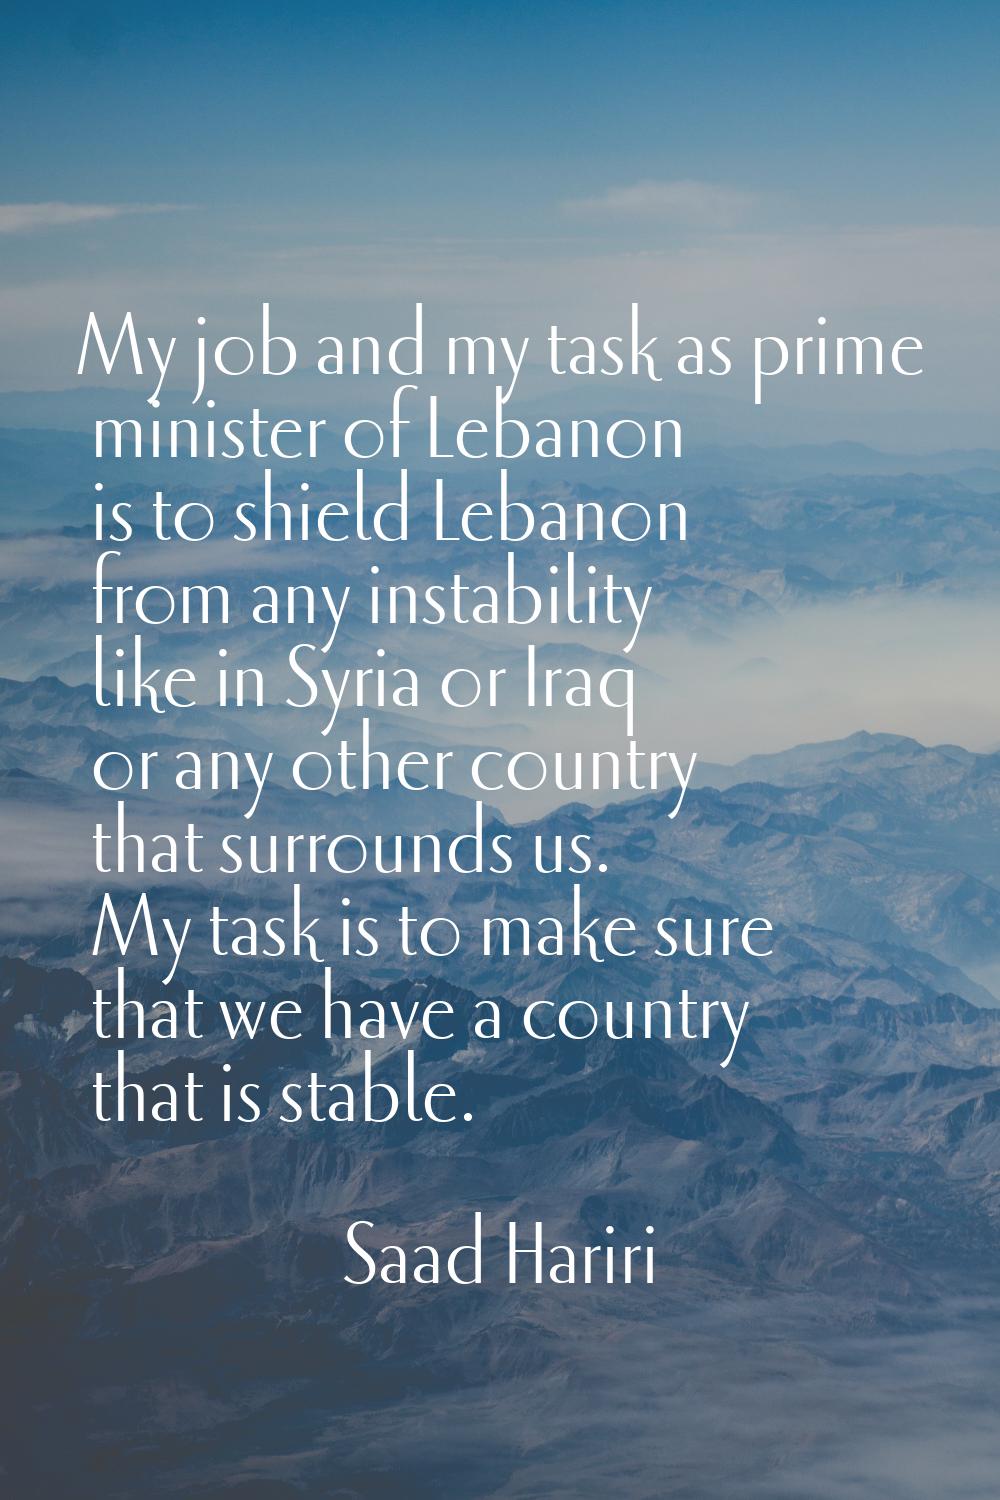 My job and my task as prime minister of Lebanon is to shield Lebanon from any instability like in S